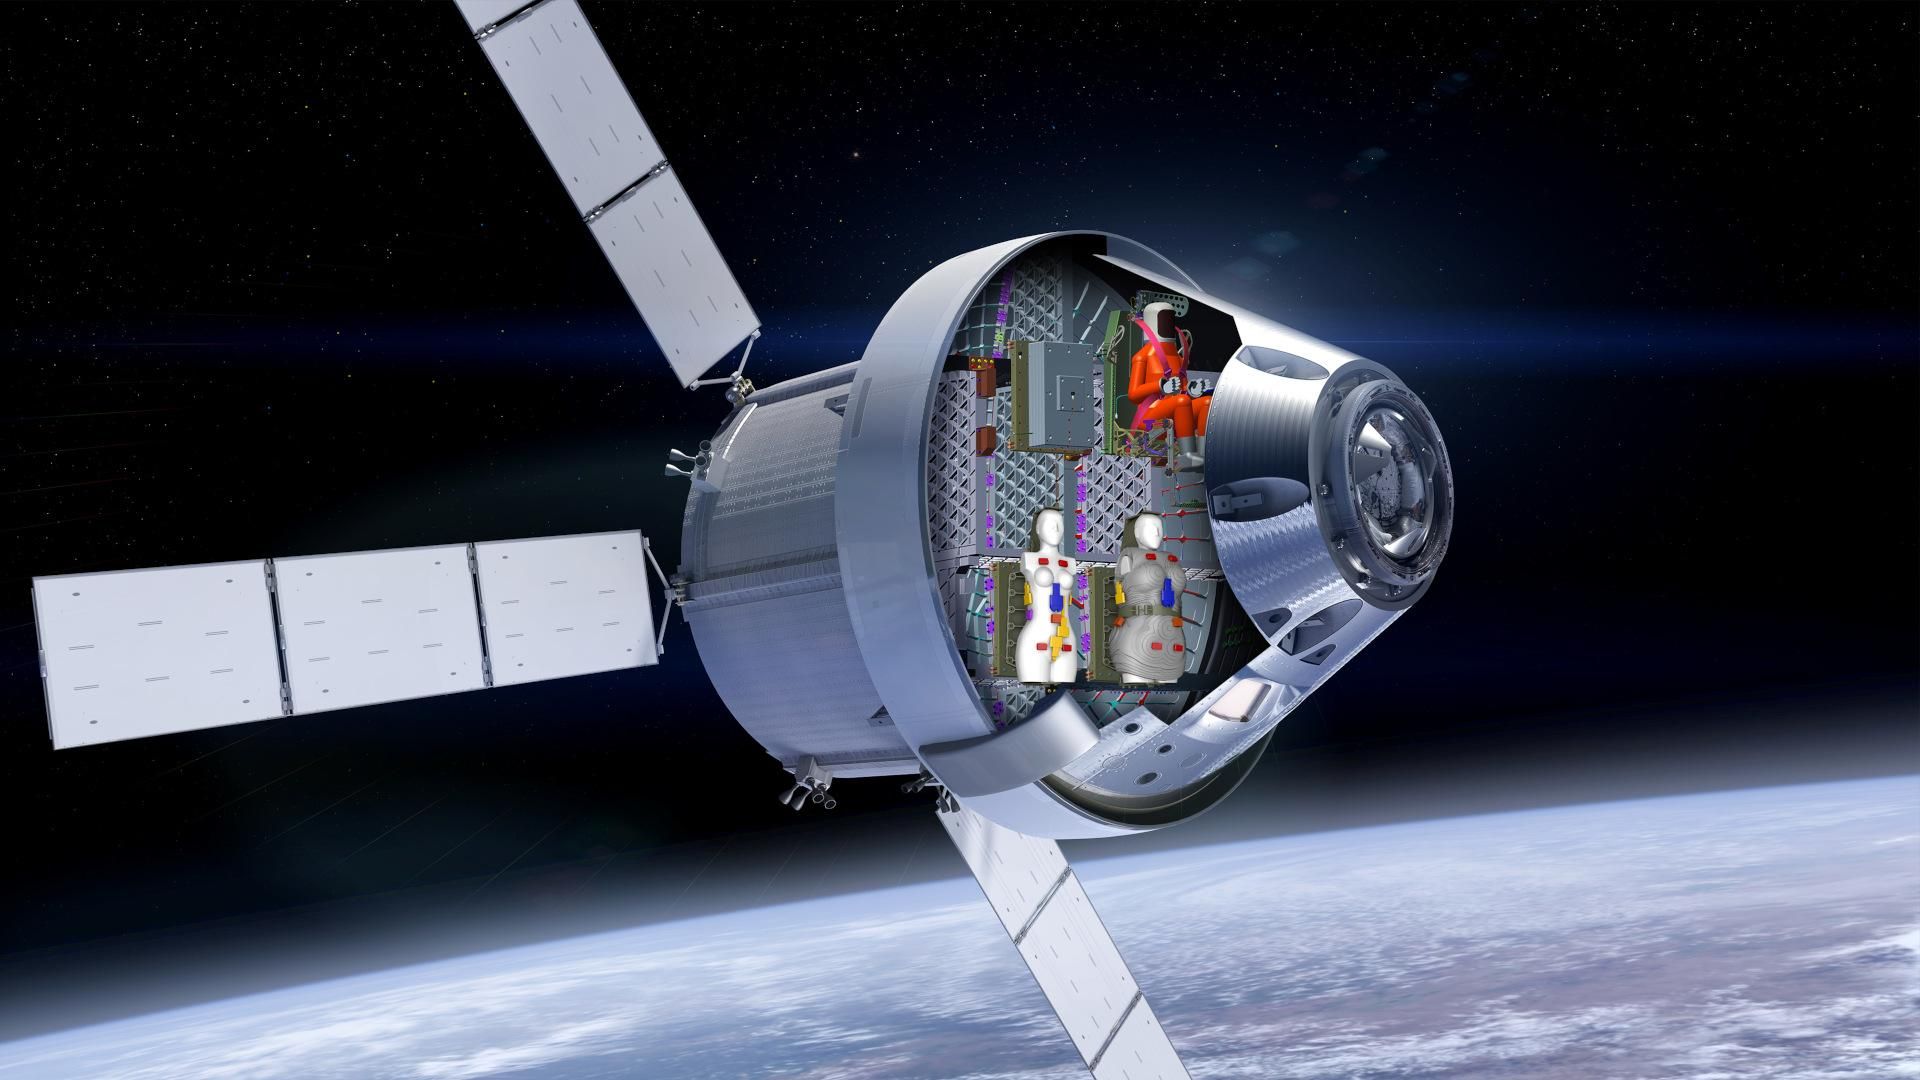 Illustration of the Orion space capsule with female mannequins in it.